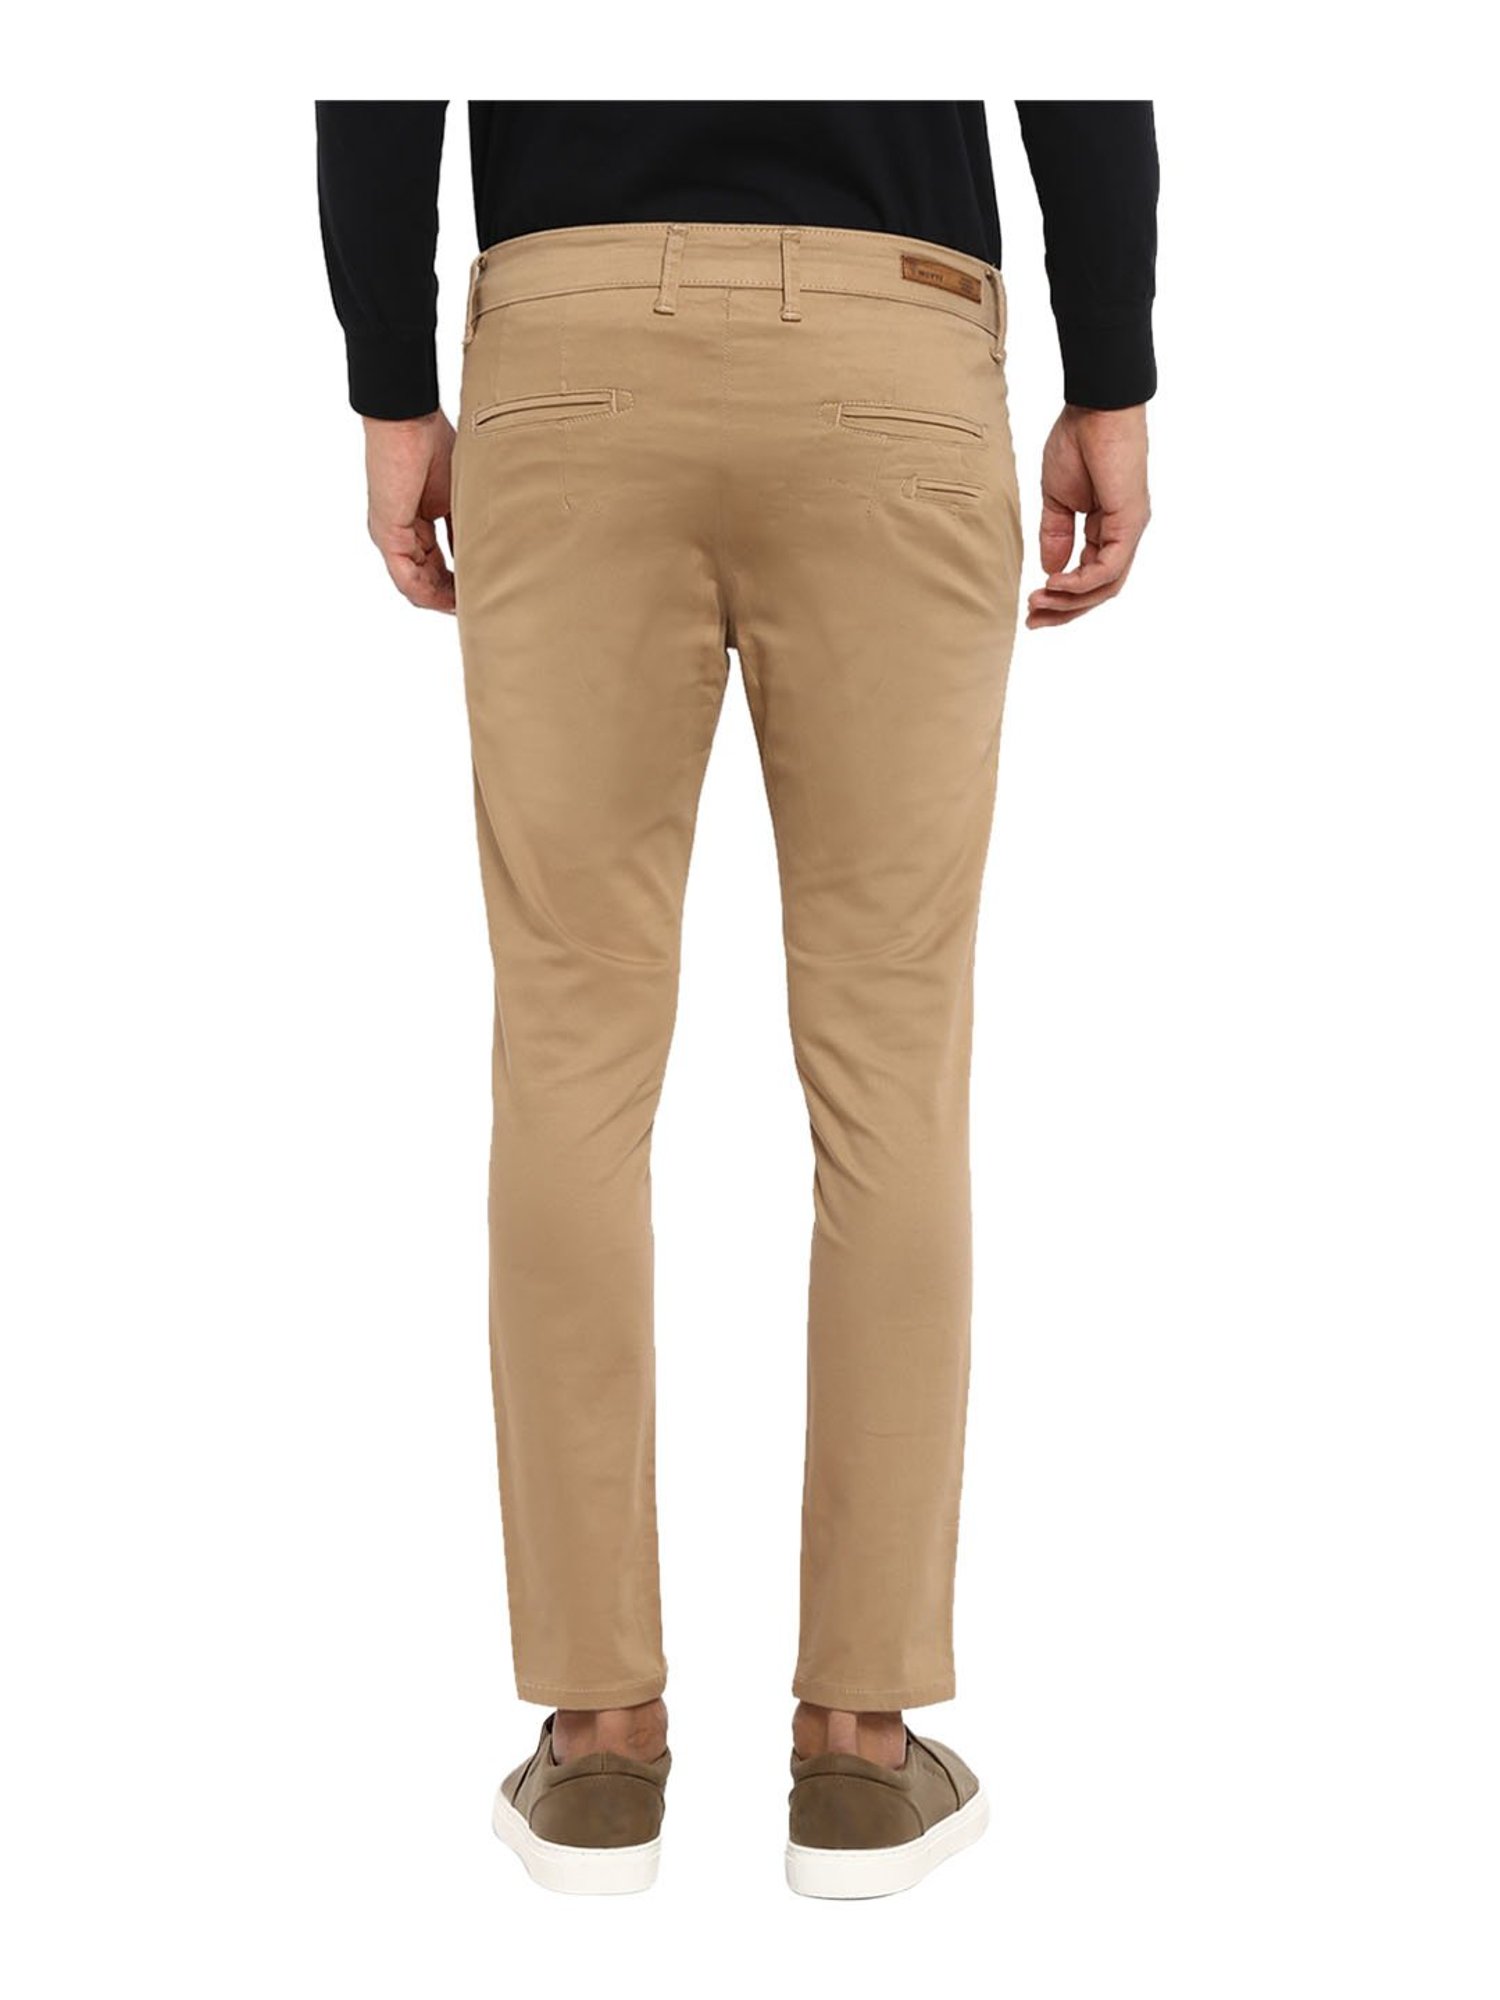 Buy MUFTI Solid Polyester Stretch Slim Fit Men's Casual Trousers  (Beige,Size_28) at Amazon.in